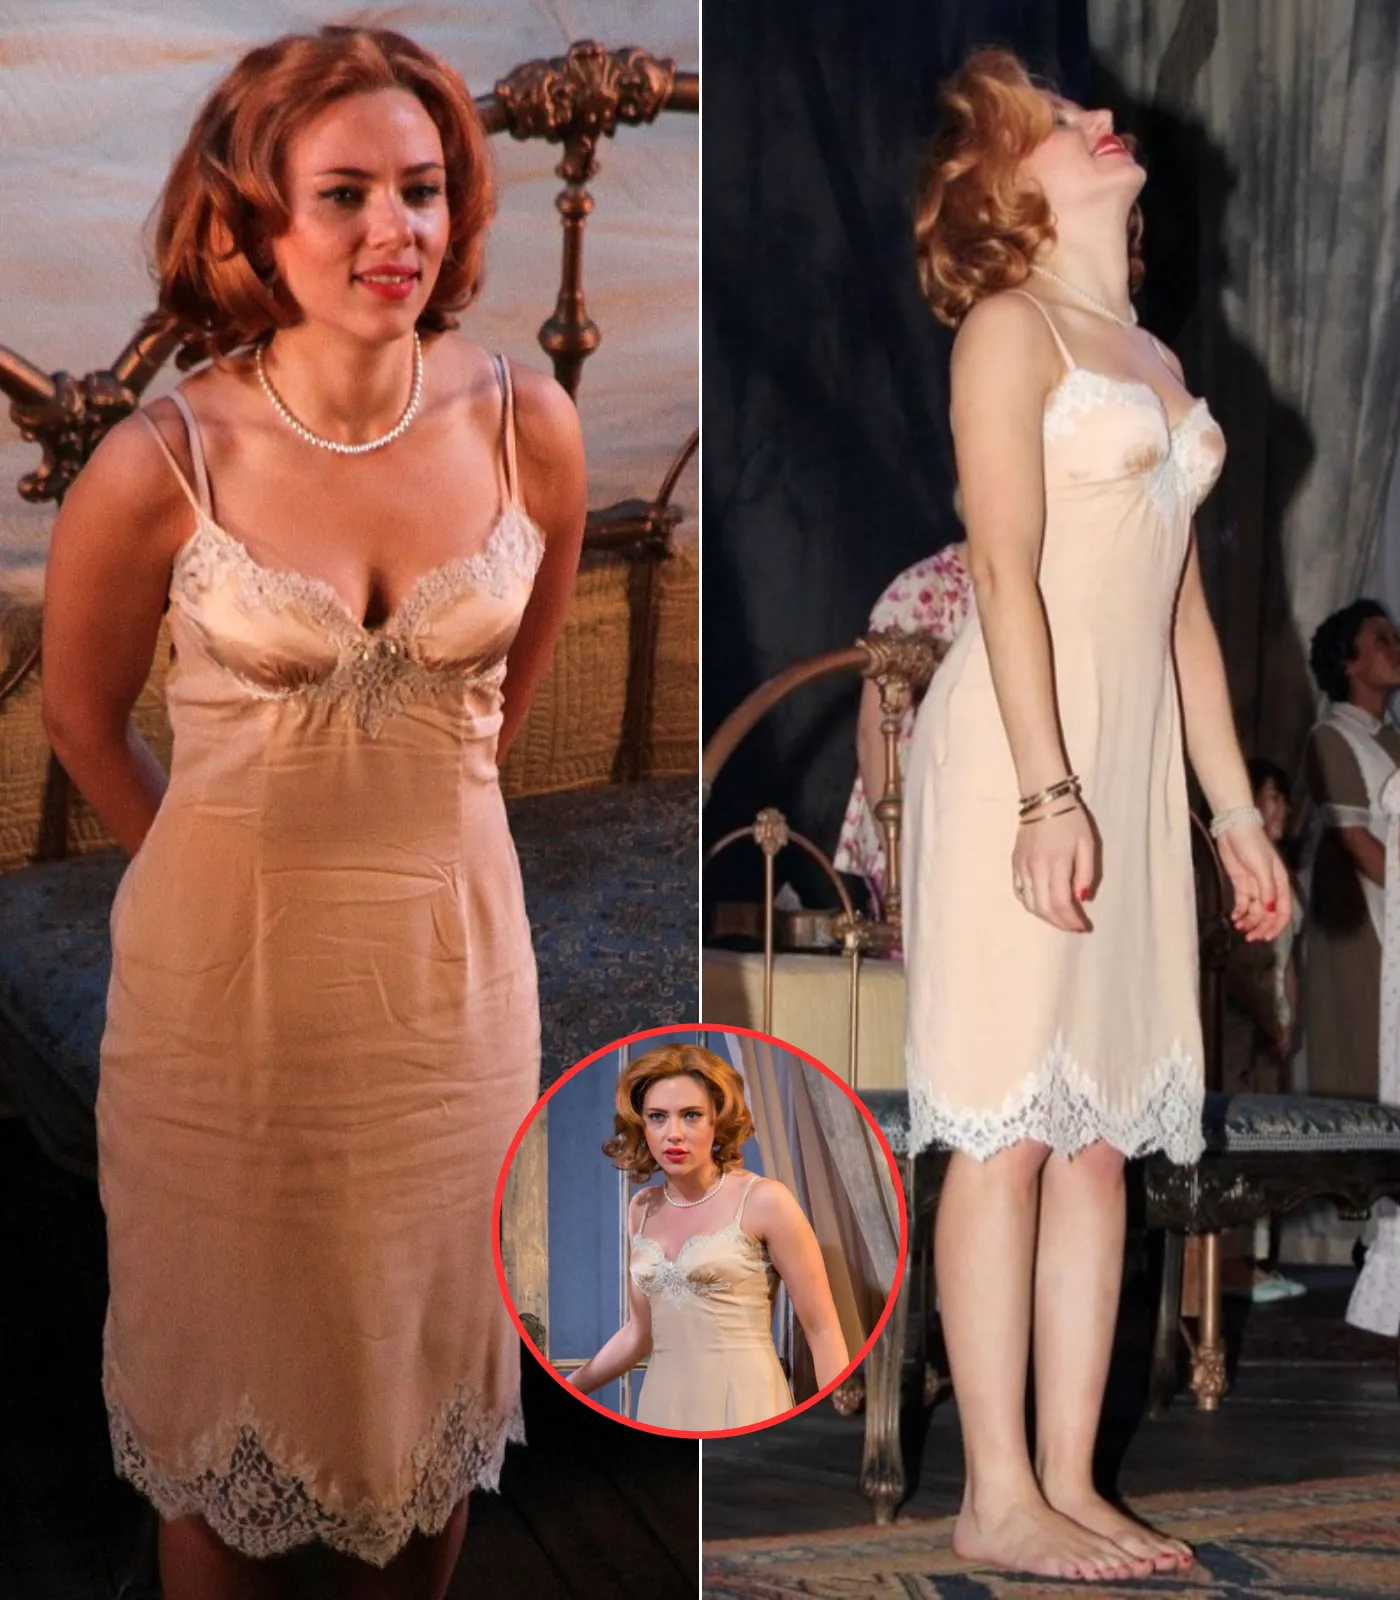 Scarlett Johansson slips into Elizabeth Taylor's negligee as she makes her debut in Cat on a Hot Tin Roof